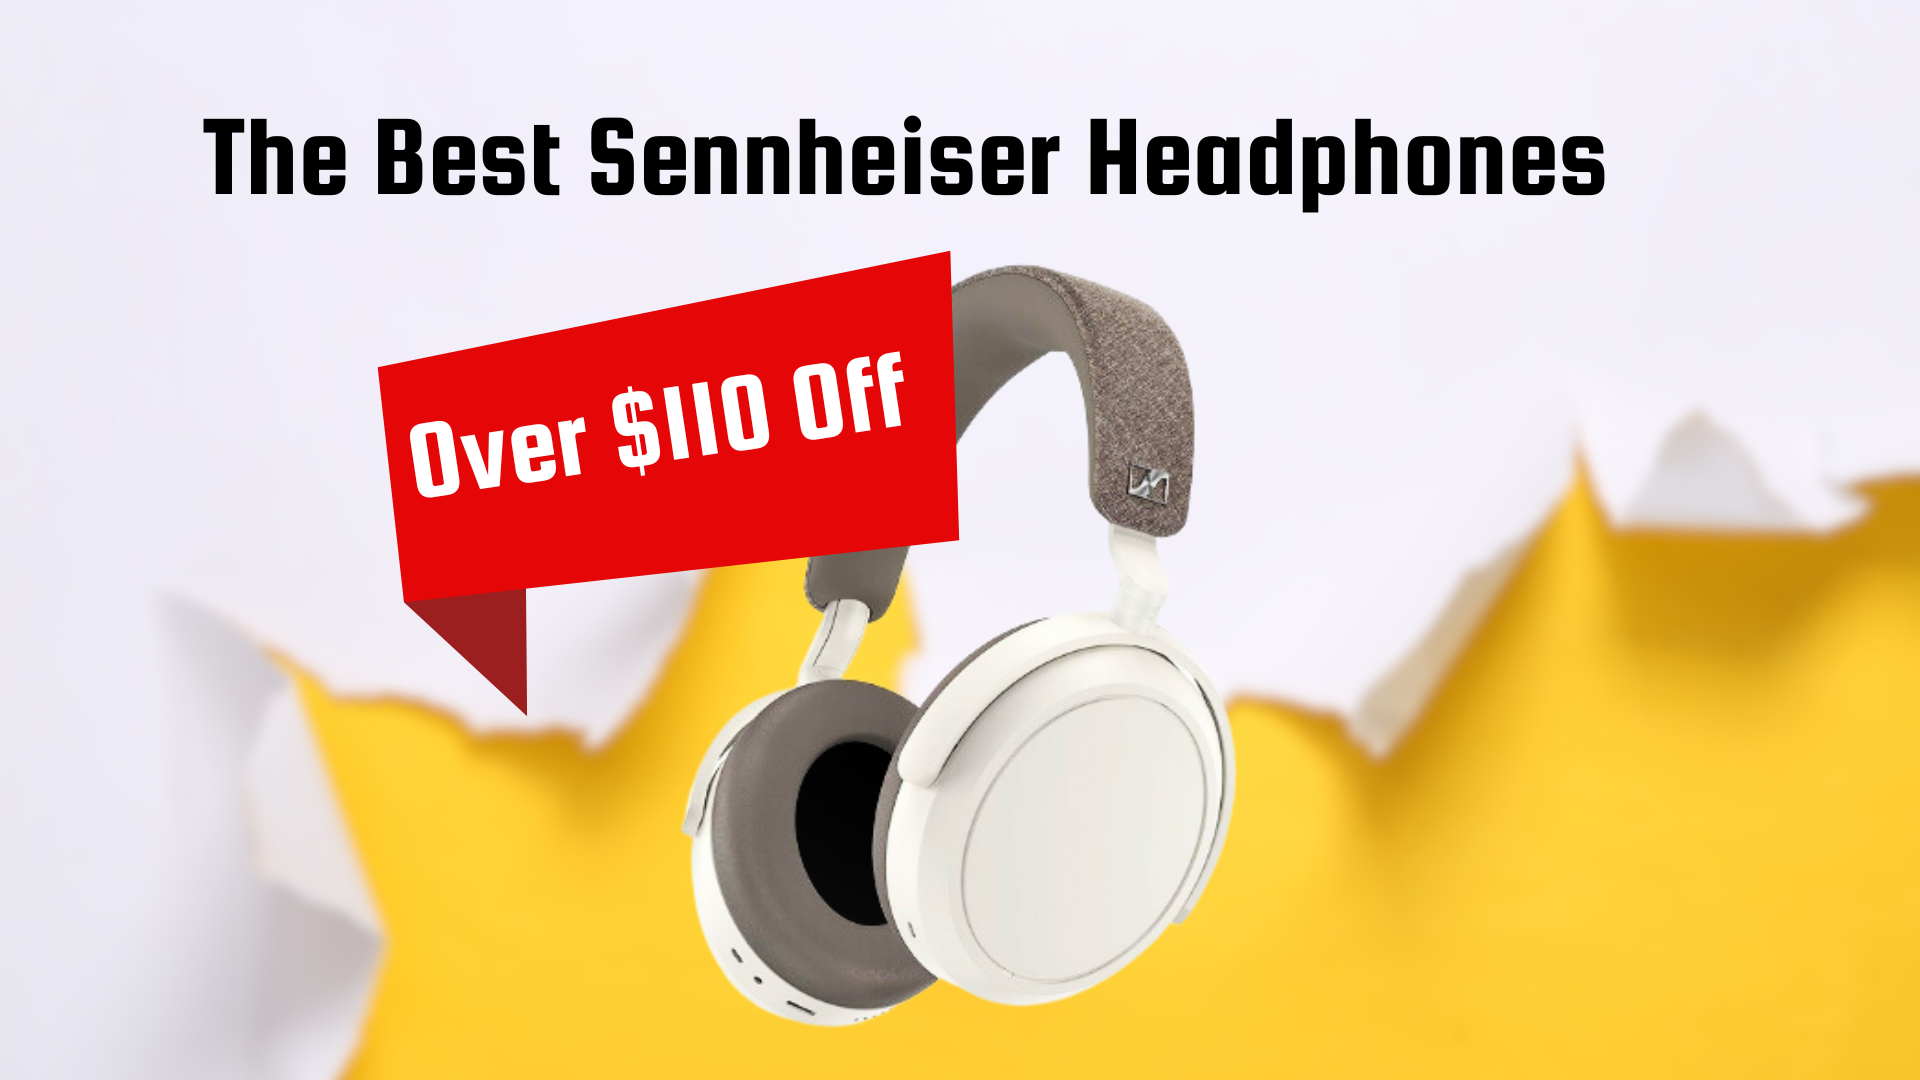 The best Sennheiser headphones are over $110 off today